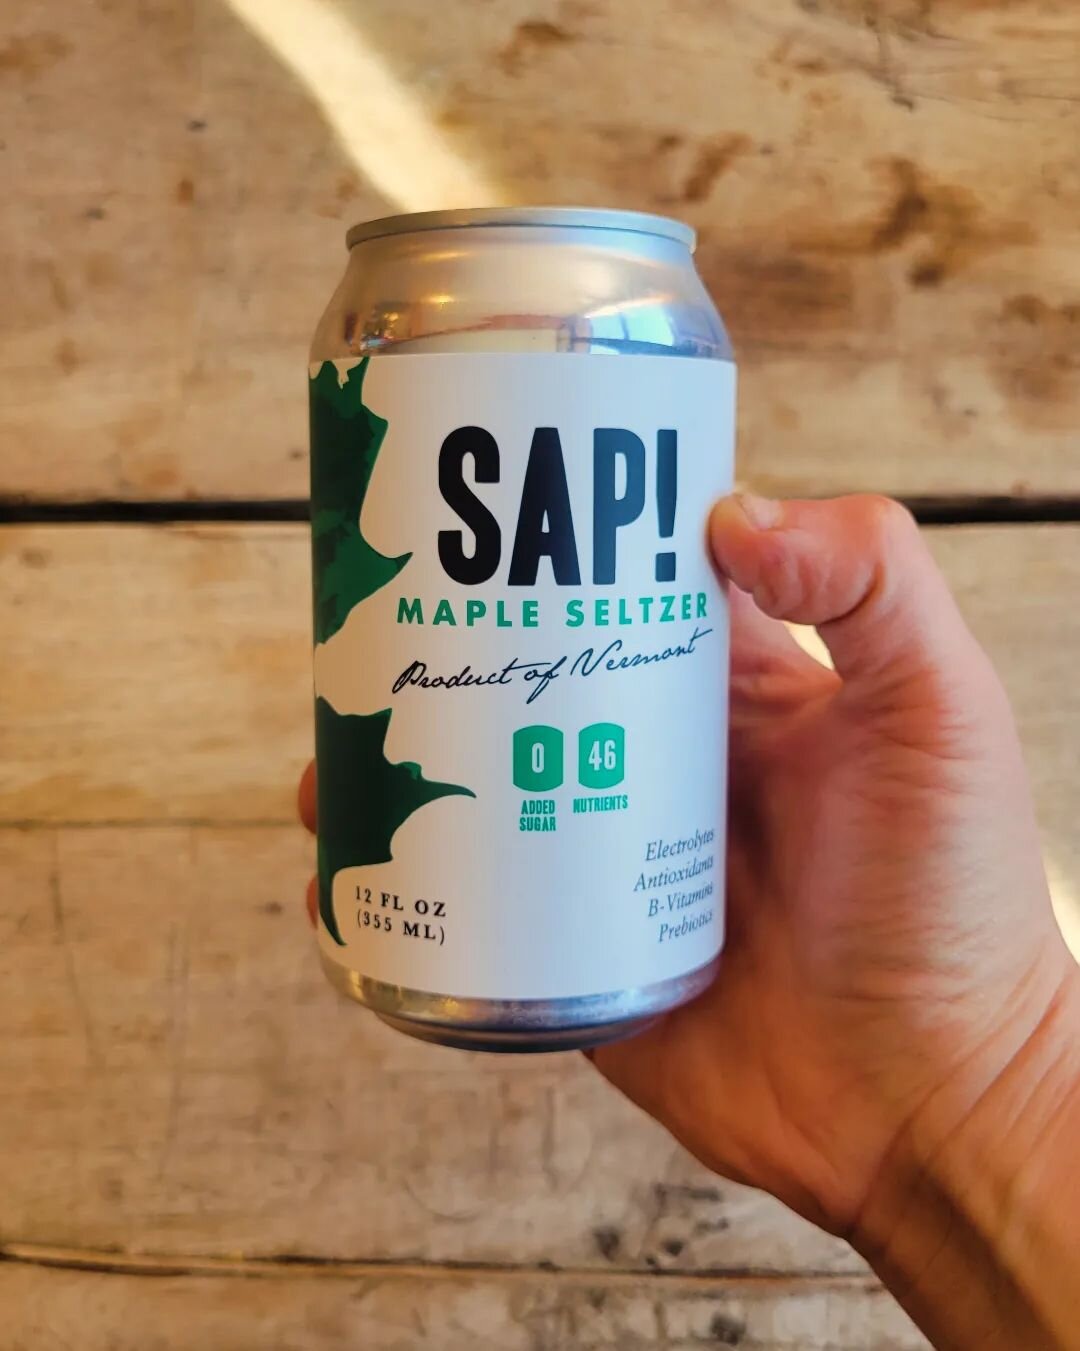 Have you ever drank sap directly from a Maple? It's one of the purest delights of winter. SAP! is the next best thing! 100% pure maple sap - carbonated and canned for your sap cravings on the go. 

#randomharvestmarket #sap #maple #drinksap #eatlocal